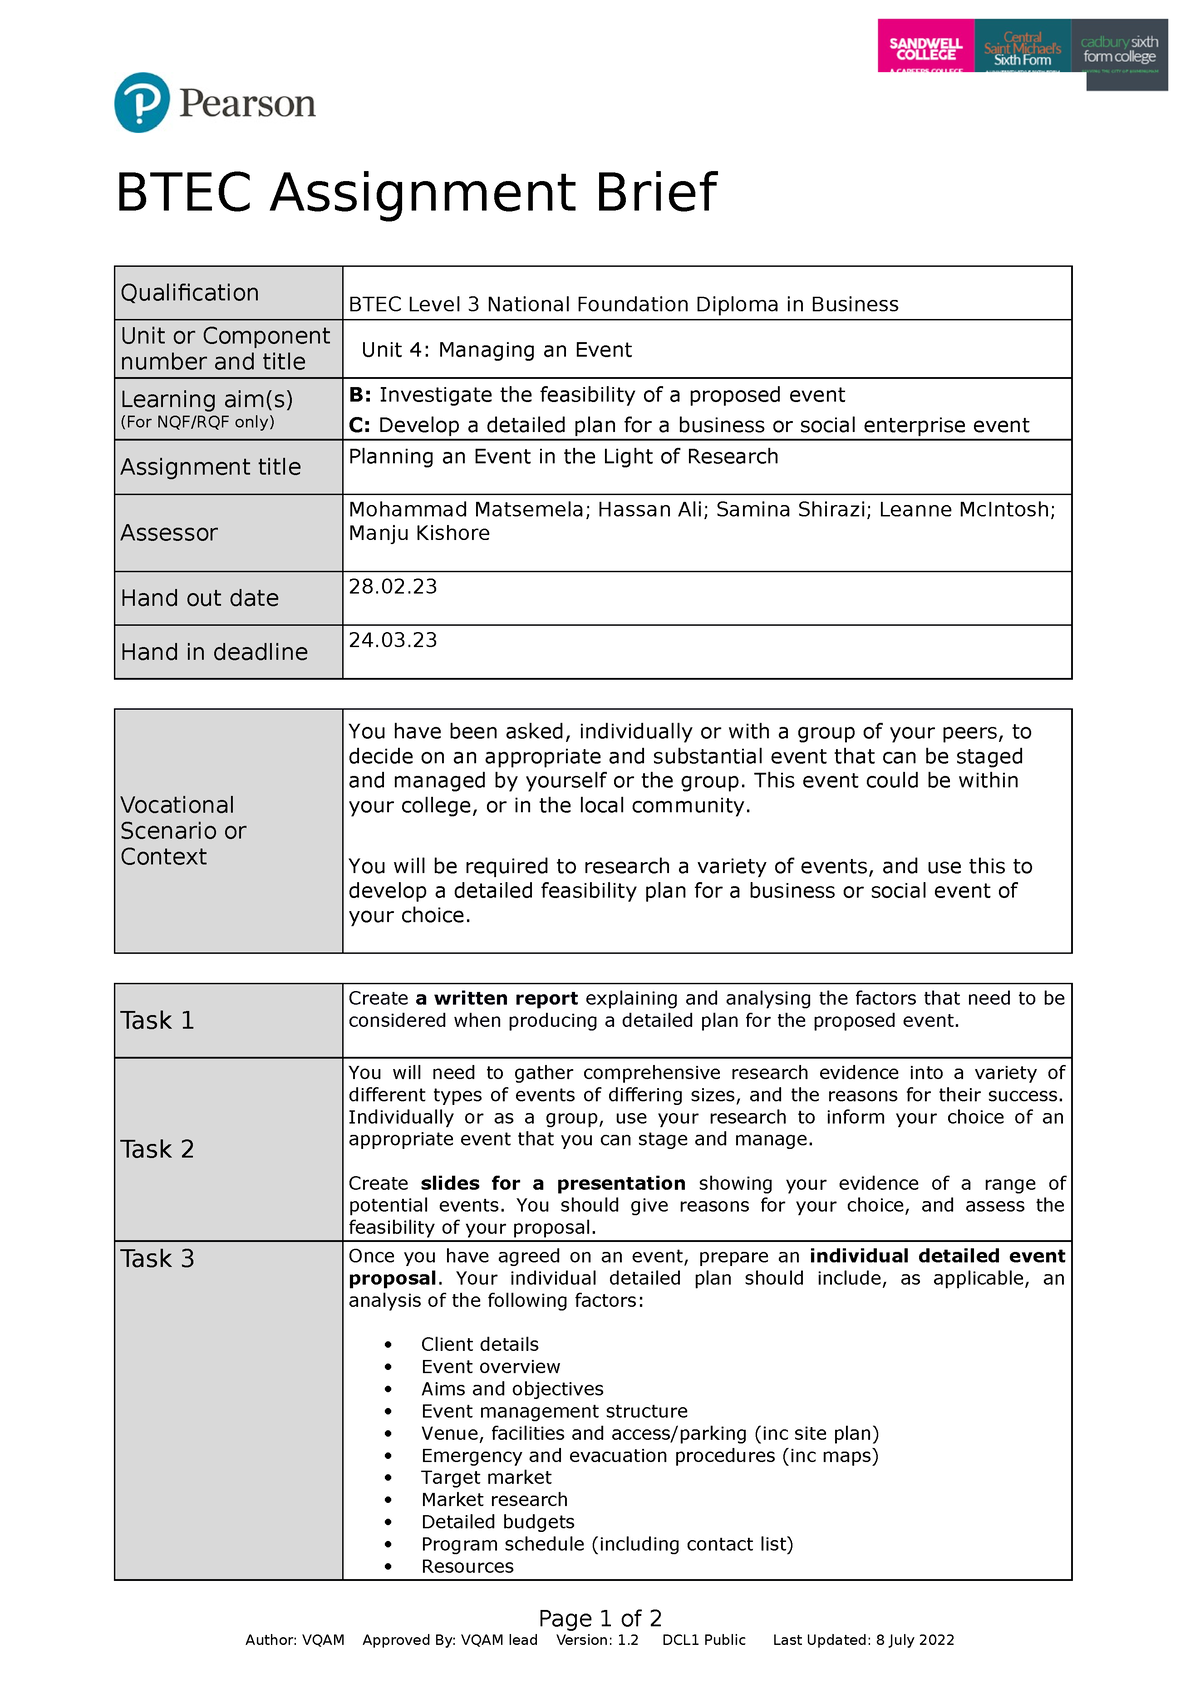 assignment brief template btec